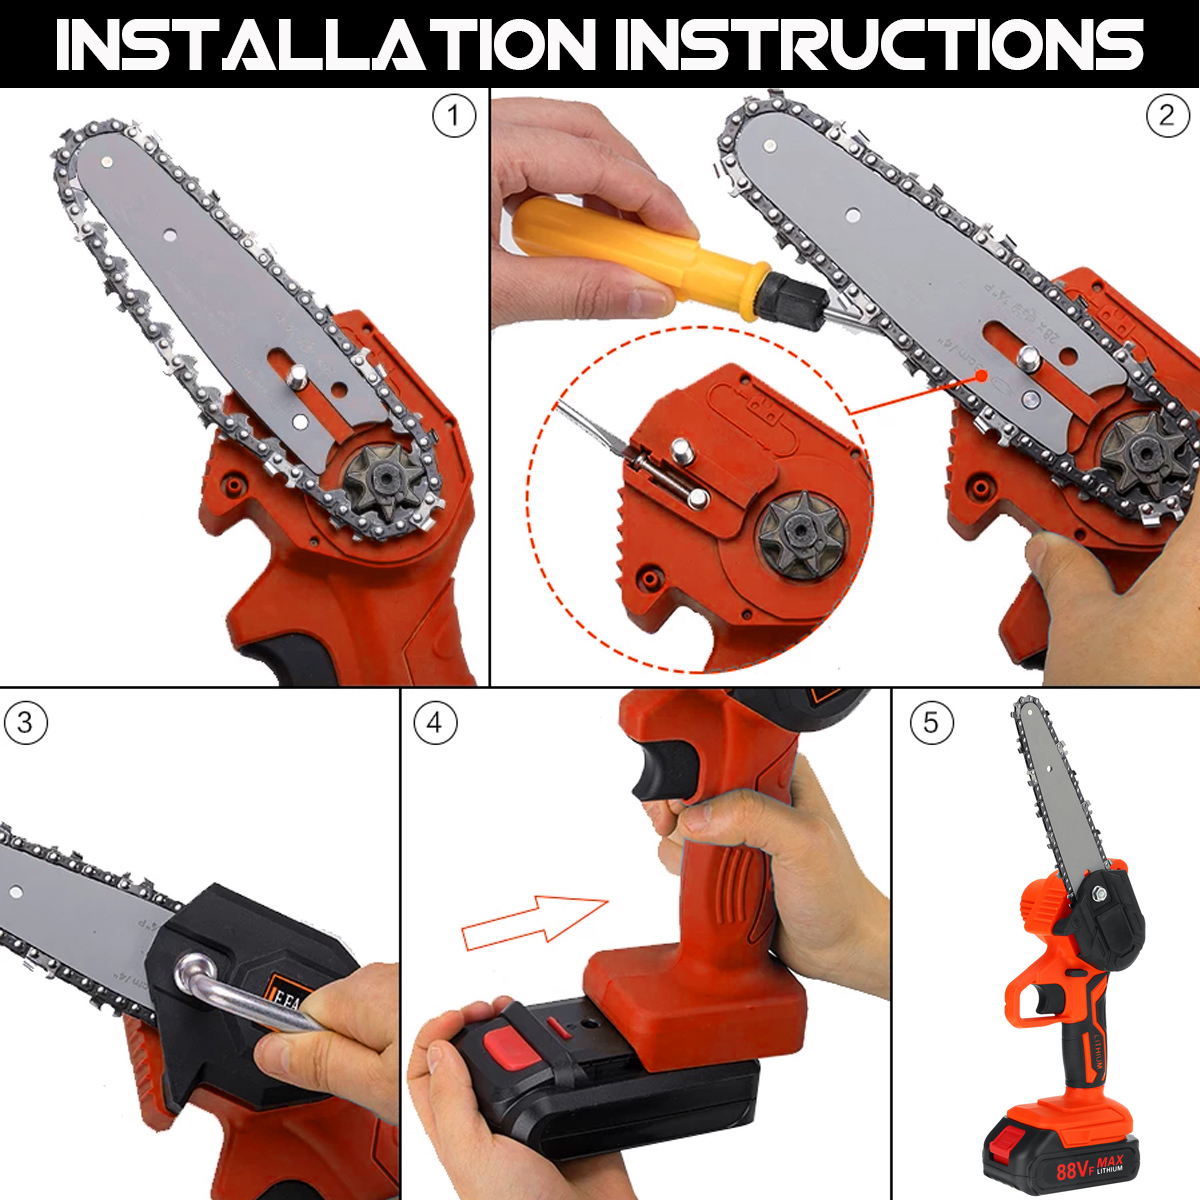 88VF-4Inch-6Inch-Cordless-Electric-Chain-Saw-One-Hand-Mini-Saw-Wood-Cutter-Woodworking-Tool-W-12-Bat-1870556-7